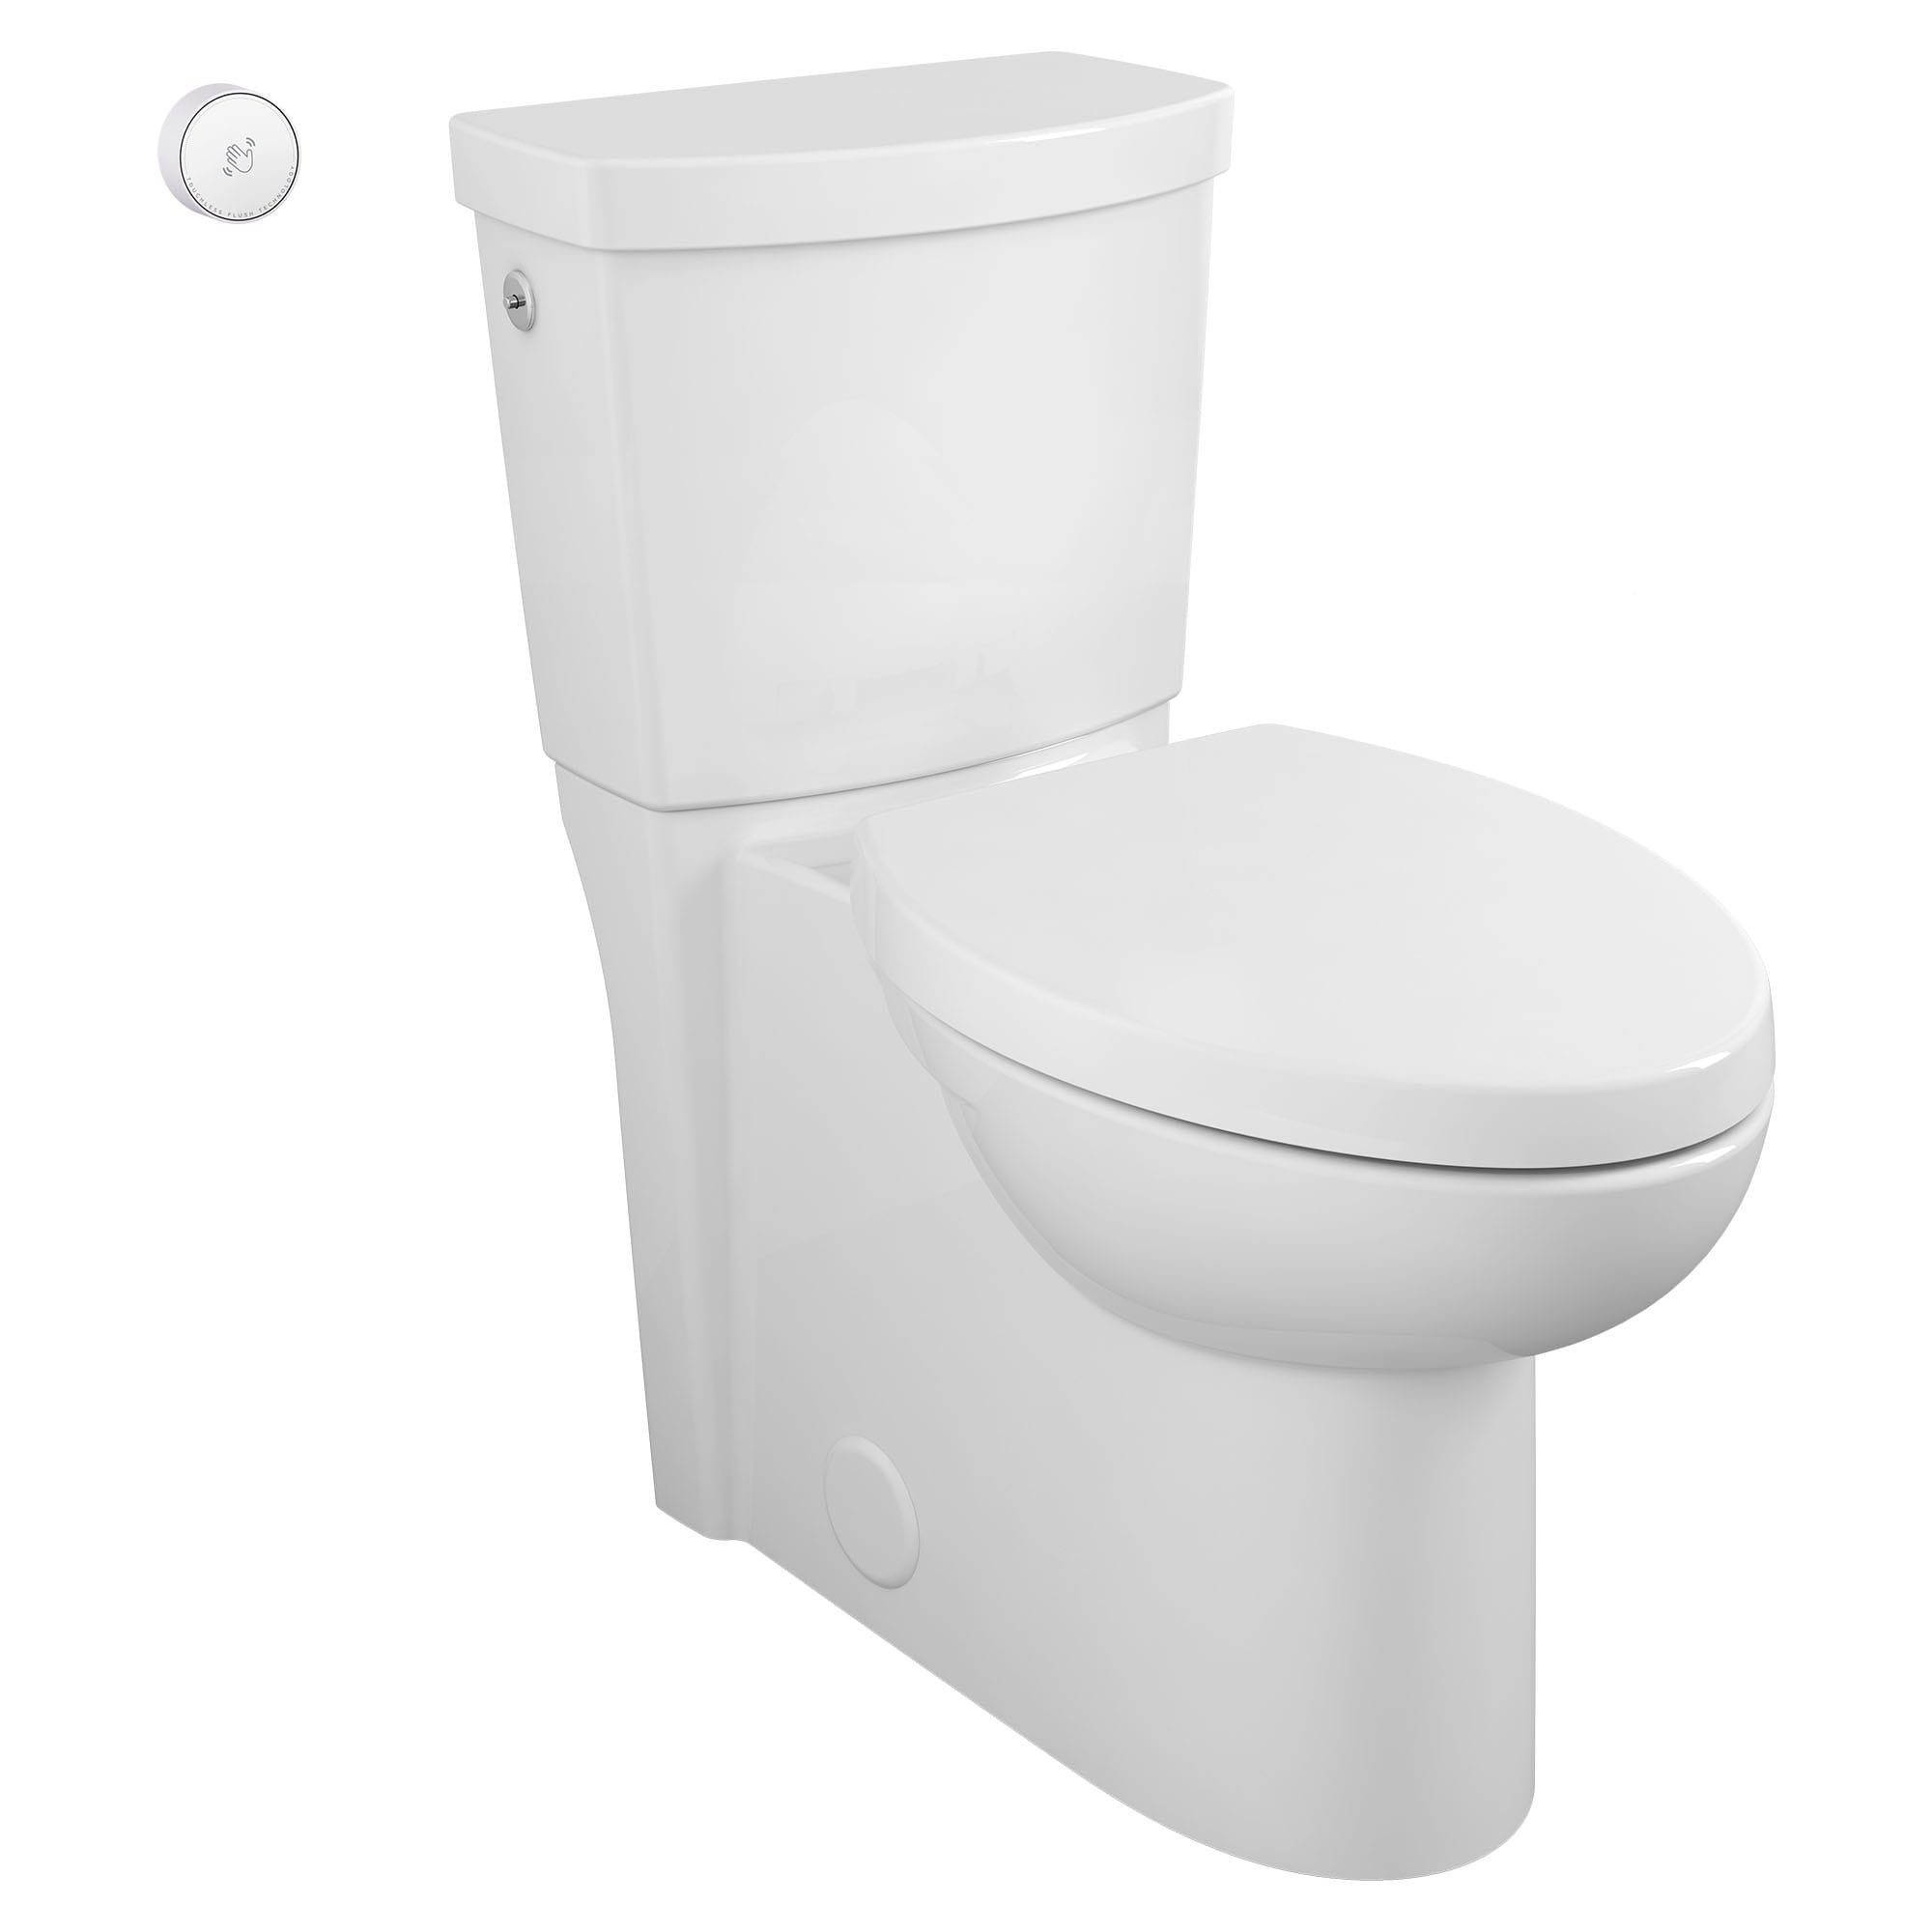 Studio Touchless Skirted Two Piece 128 gpf 48 Lpf Chair Height Elongated Toilet with Seat WHITE